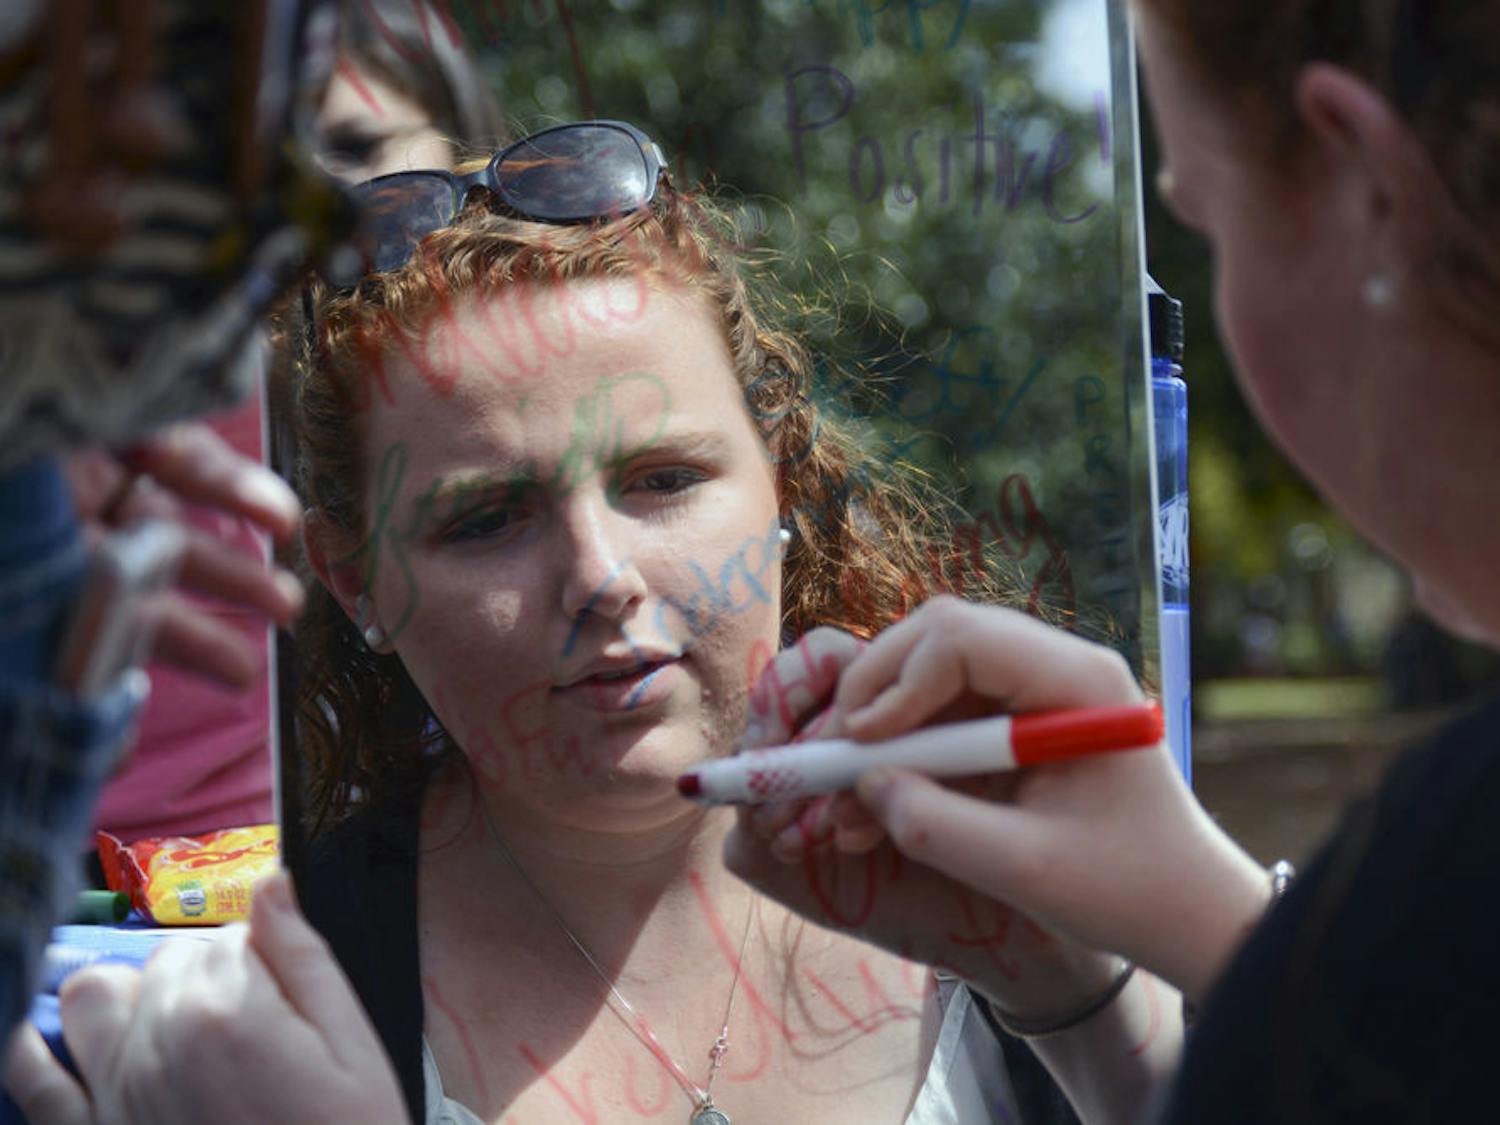 Niamh Clancy, an 18-year-old UF biology freshman, writes on a mirror on Plaza of the Americas as part of the “Mirrorless Monday” event, which was sponsored by GatorWell and partnered with Housing and Residence Education, the Student Health Care Center and RecSports. They invited students to write things they liked about themselves on mirrors around campus. Clancy wrote, “I like to make others happy.”